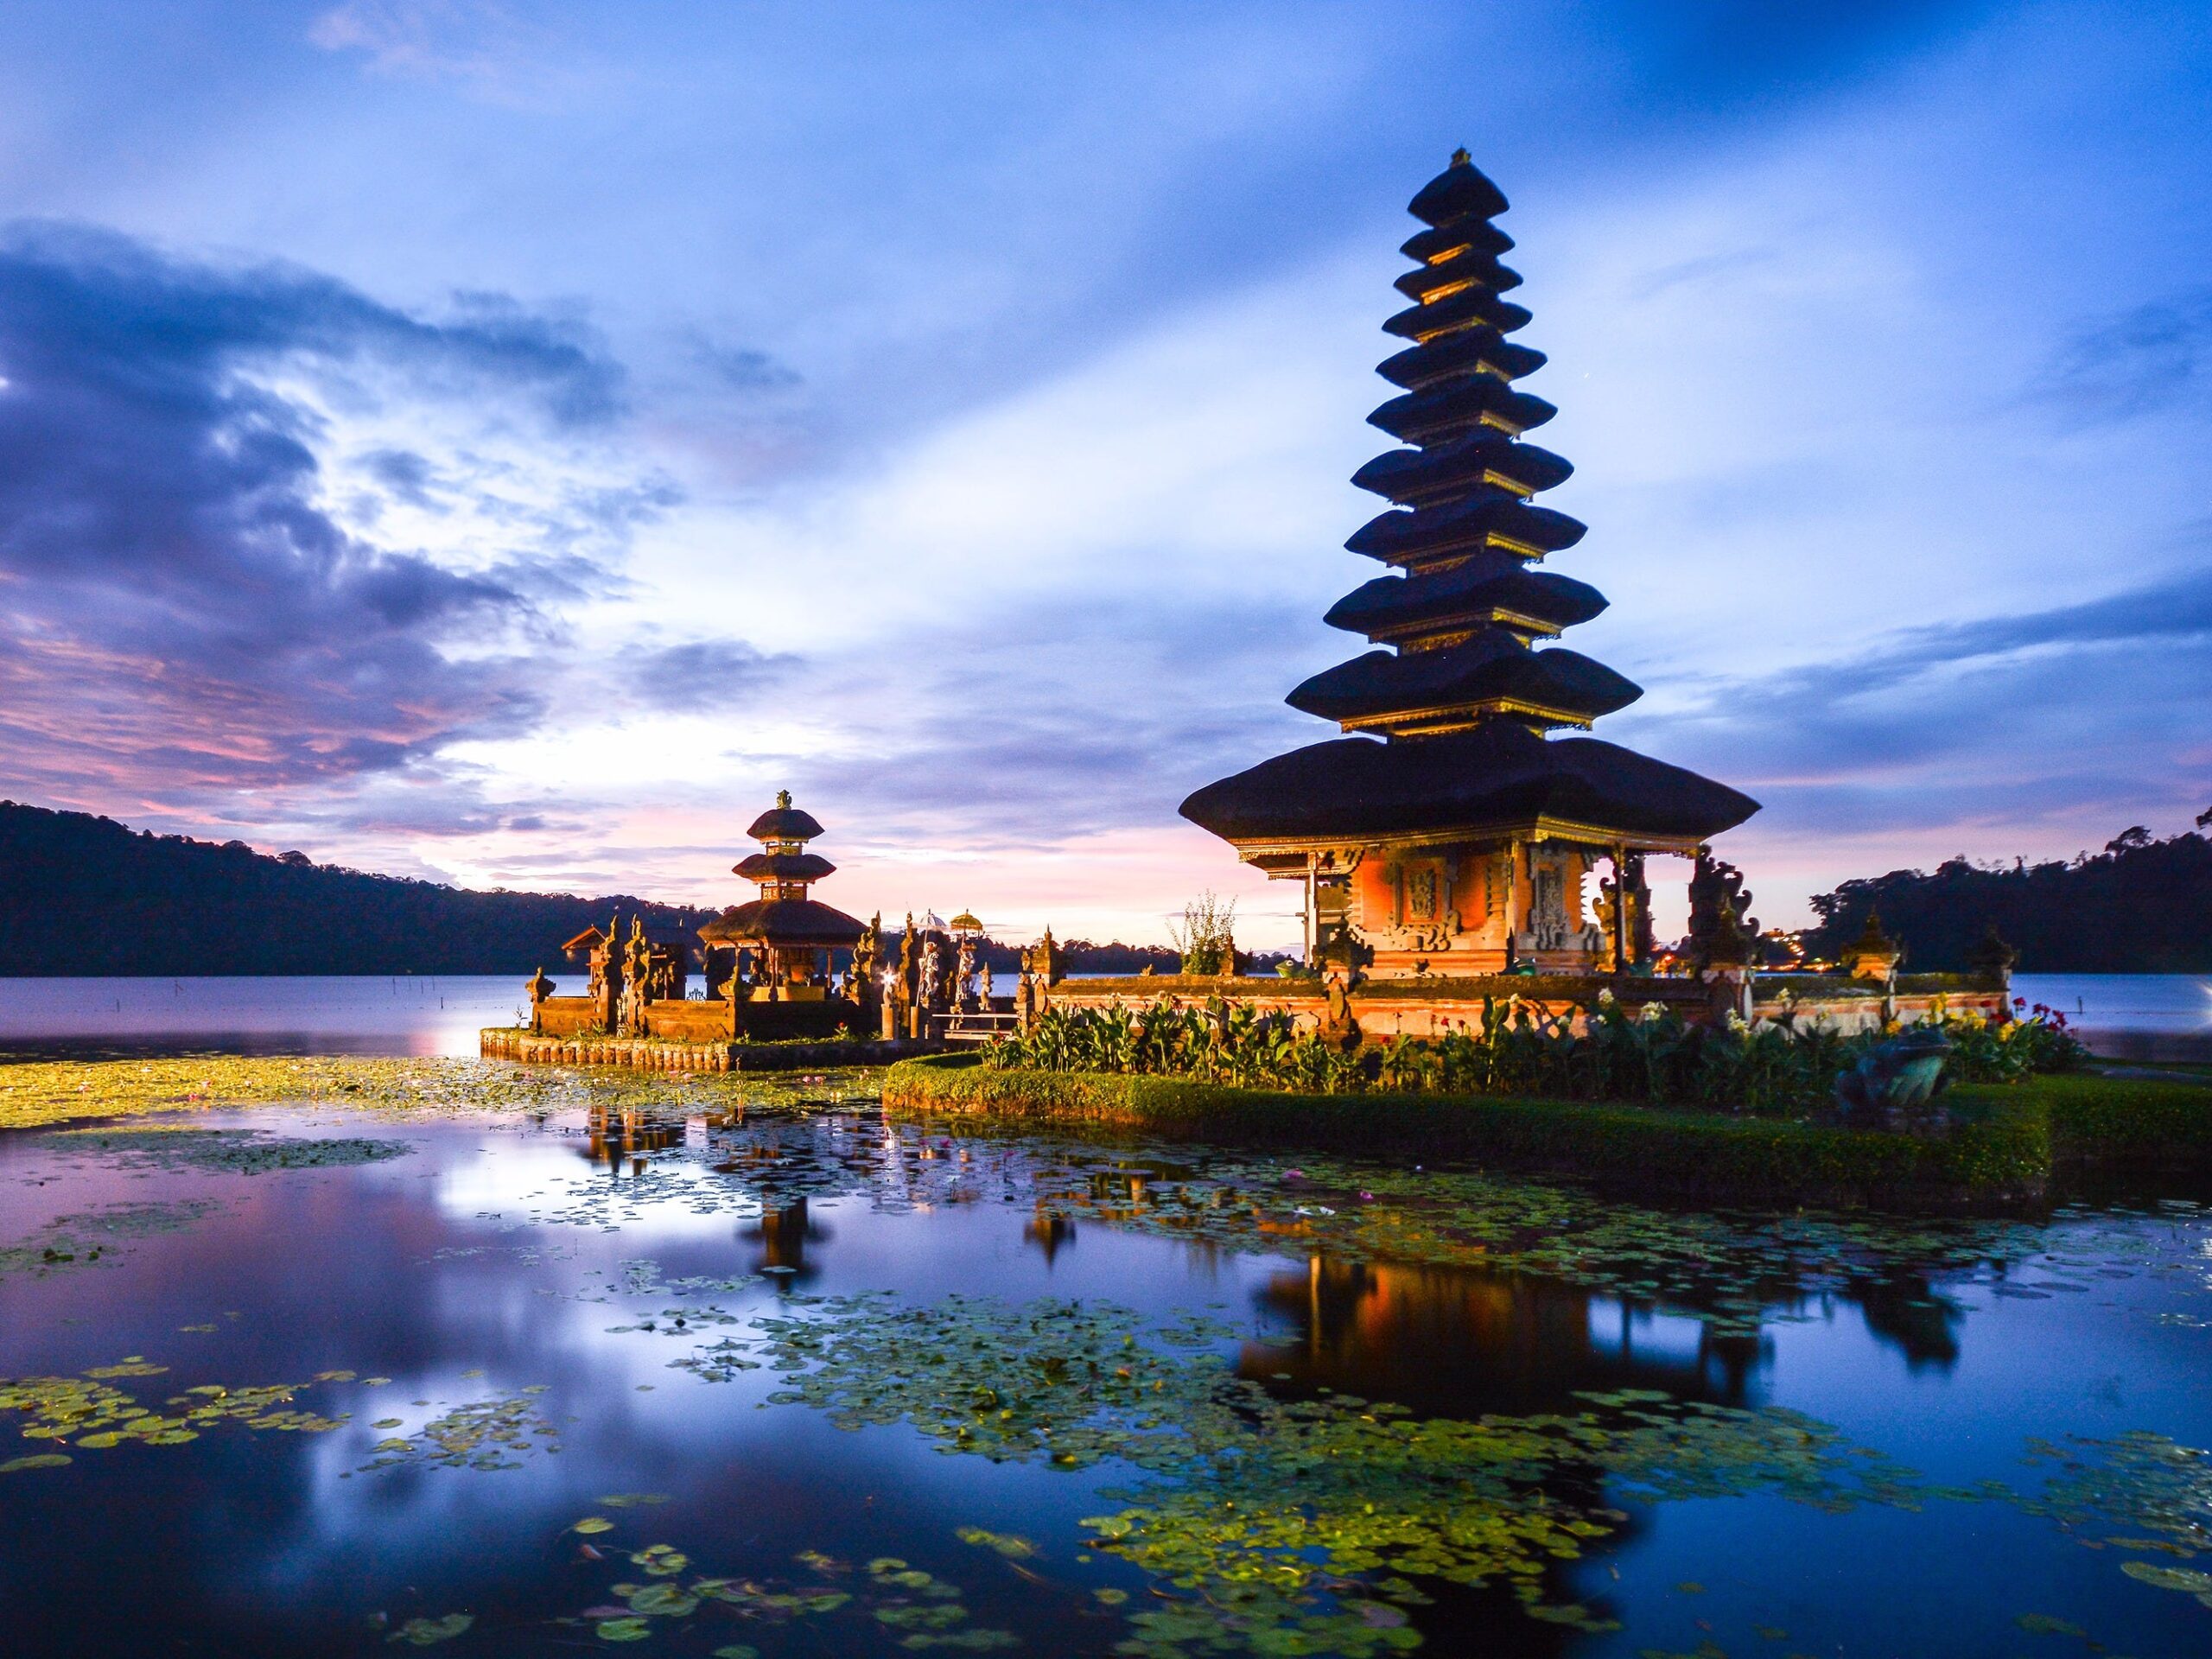 The image shows Pura Ulun Danu Bratan, a Balinese Hindu temple located on the shores of Lake Bratan in Bali, Indonesia. The temple is a popular tourist attraction due to its stunning setting and unique architecture.